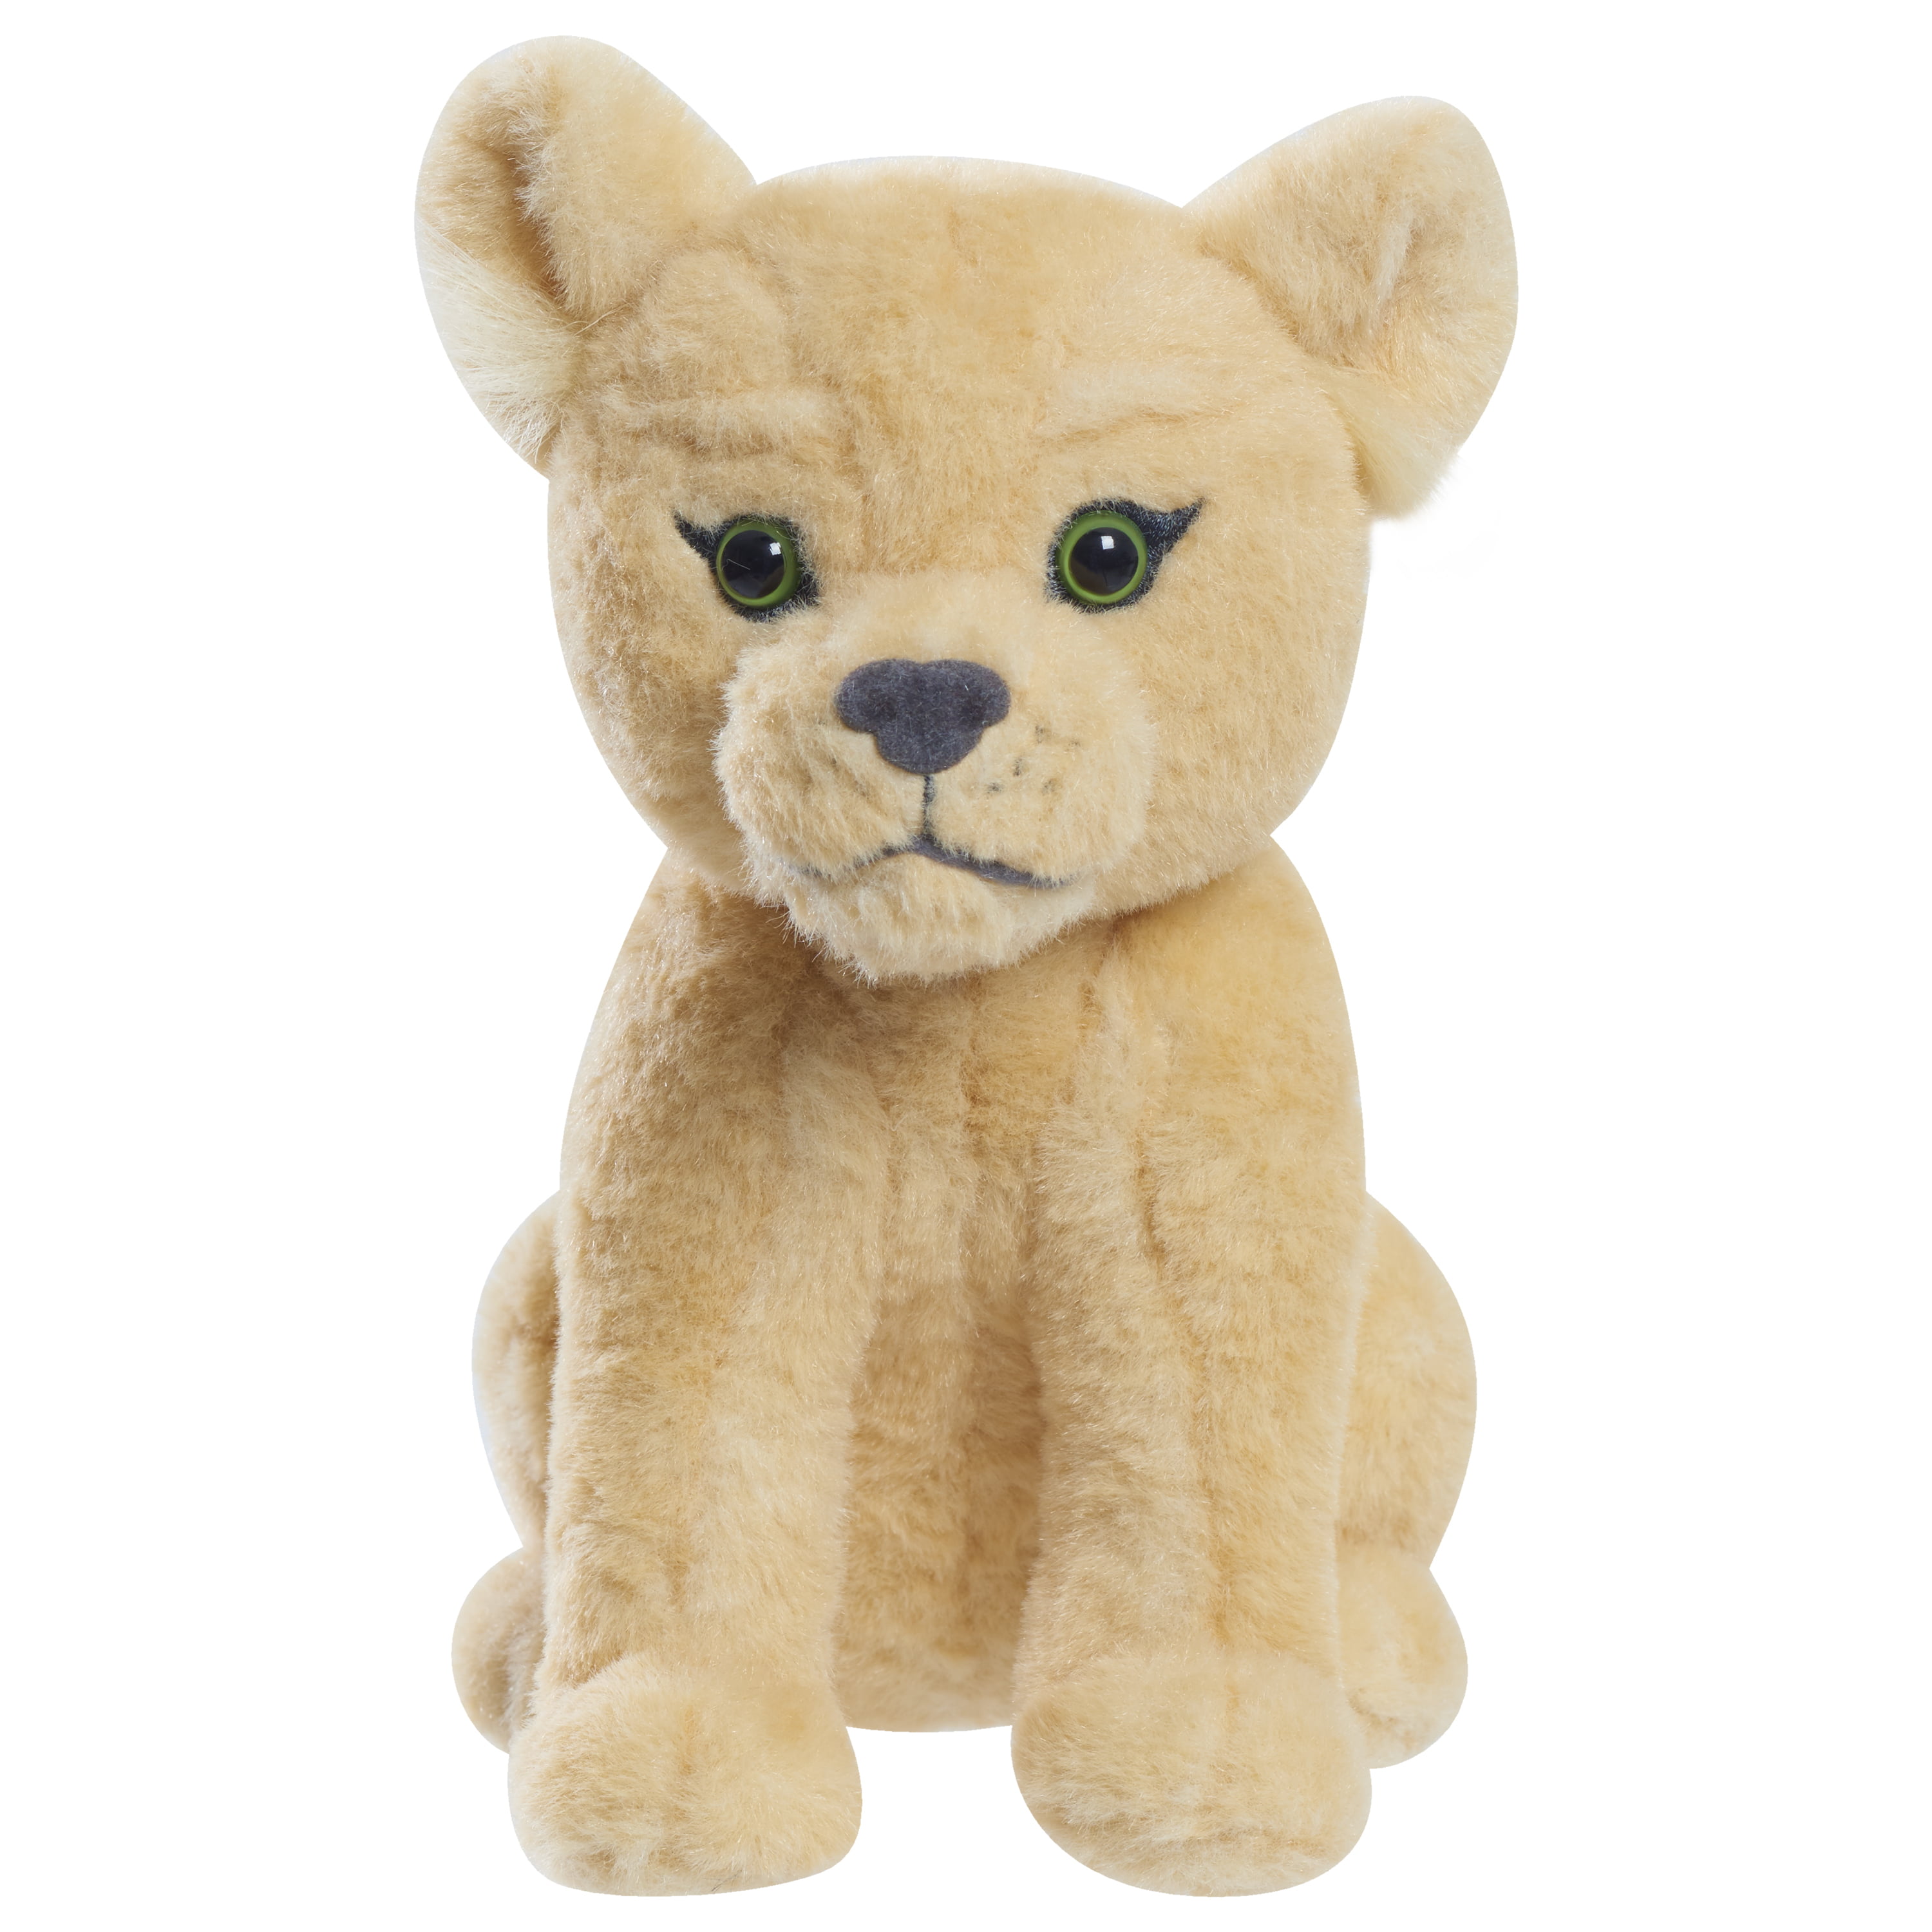 Disney's The Lion King Nala Plush Toy by Just Play 7" 2019 